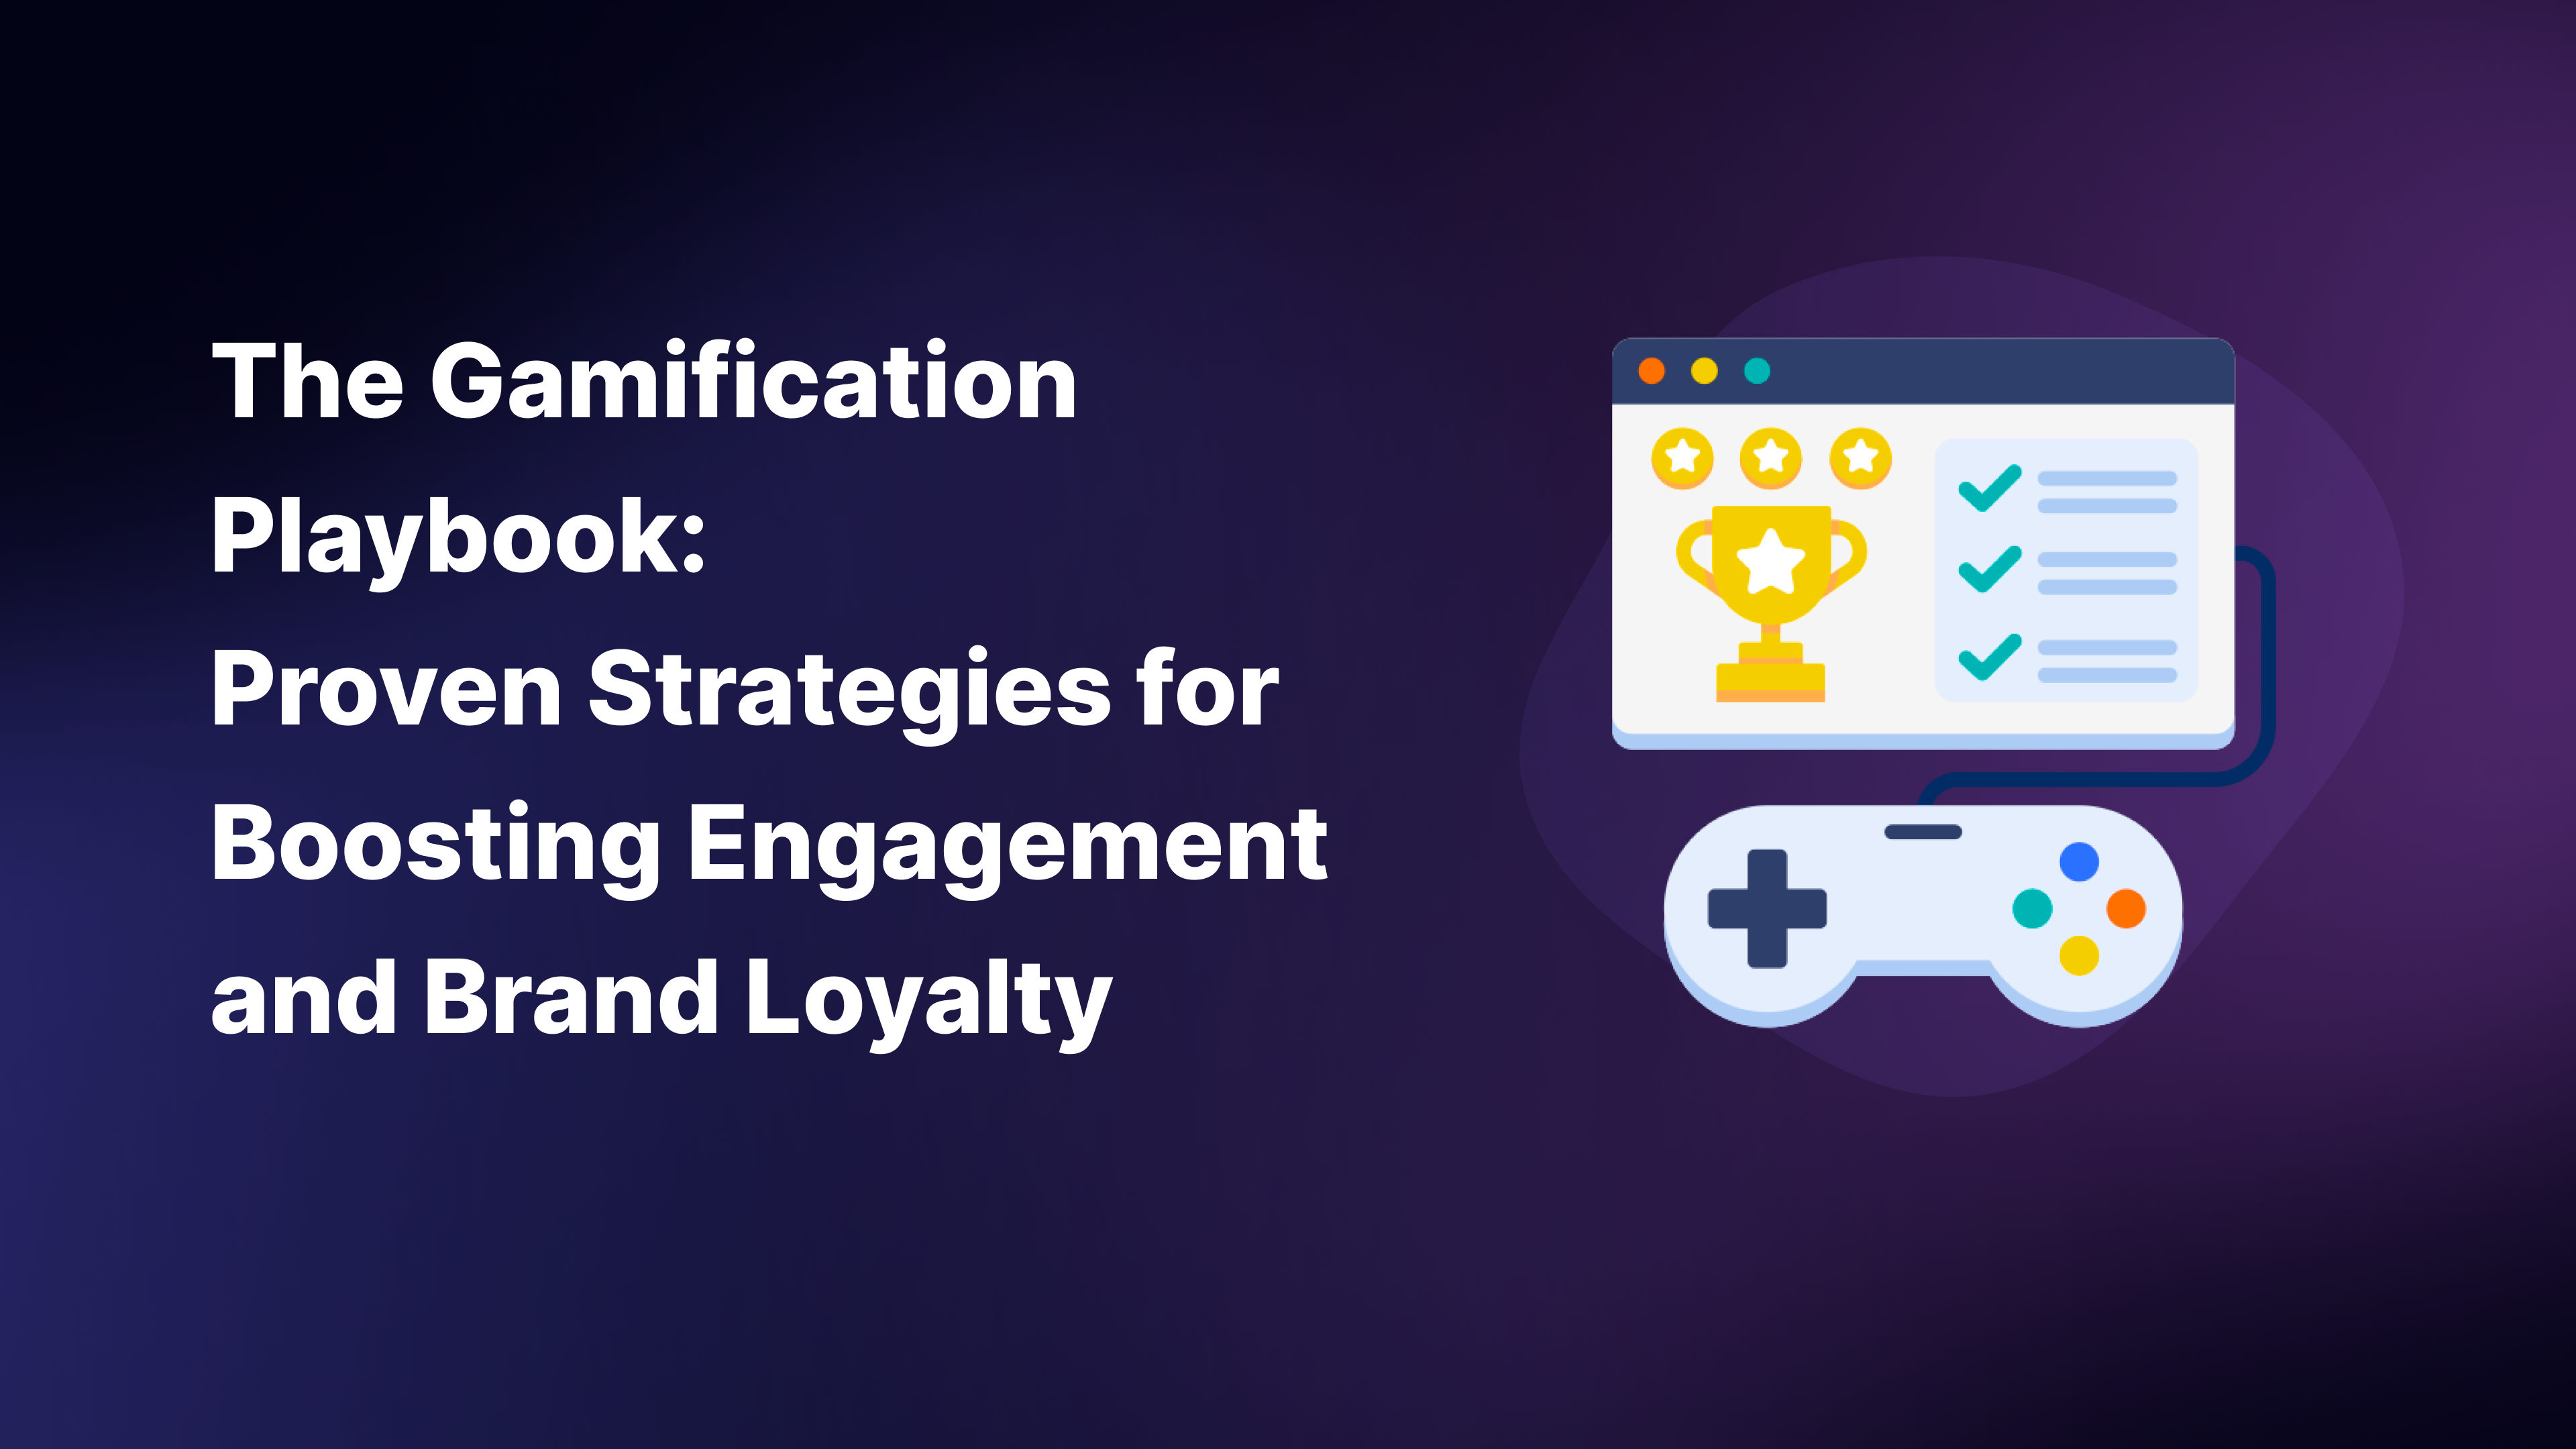 The Gamification Playbook: Proven Strategies for Boosting Engagement and Brand Loyalty